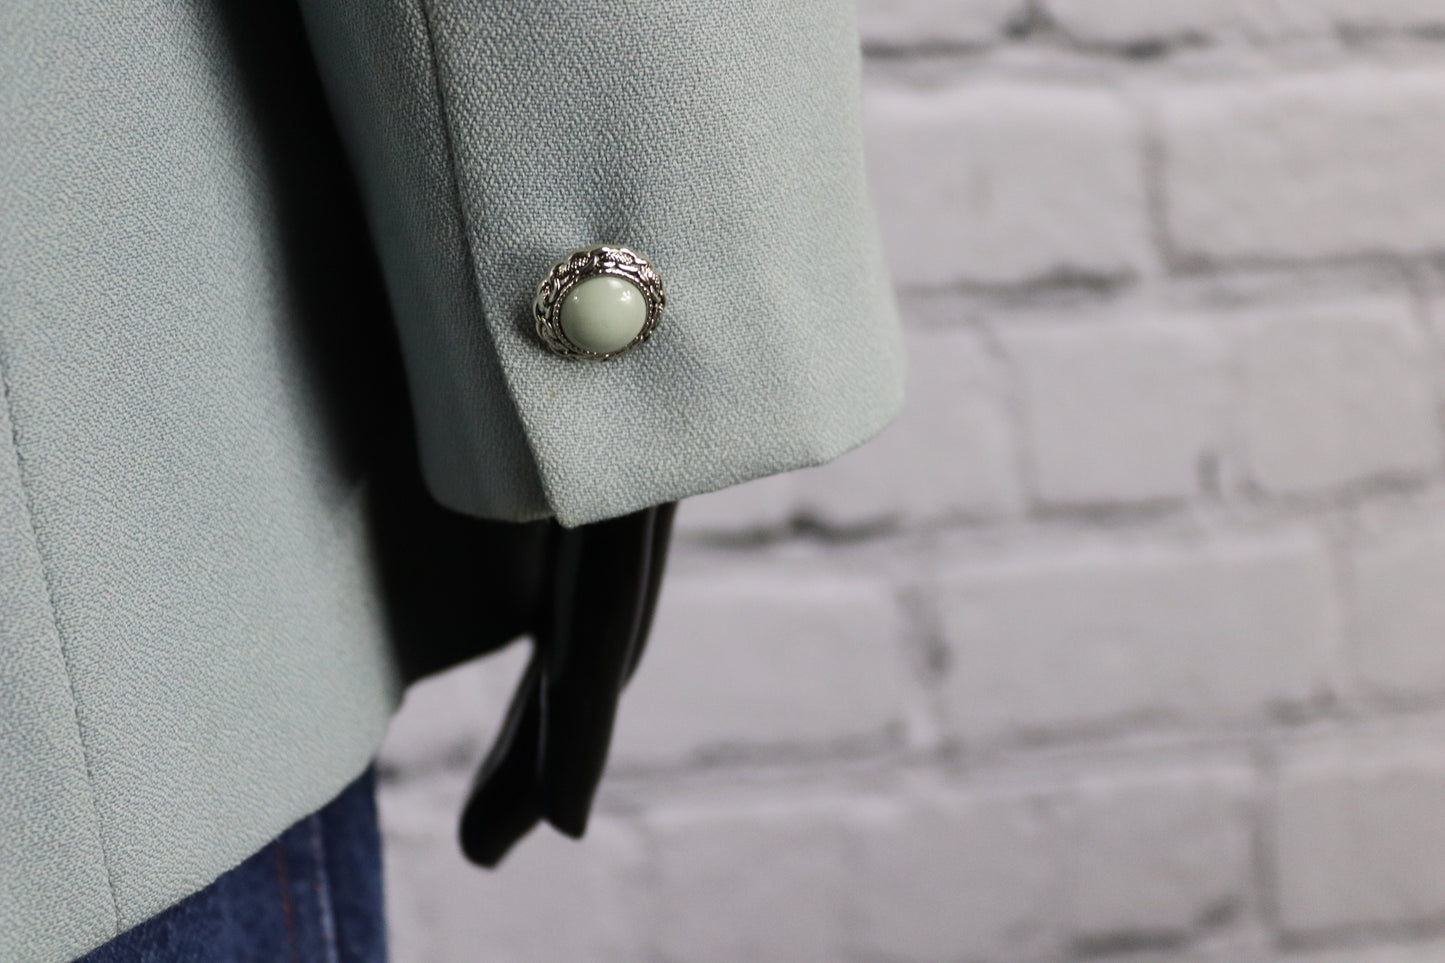 1980's Vintage Light Blue Blazer with Pearl Button